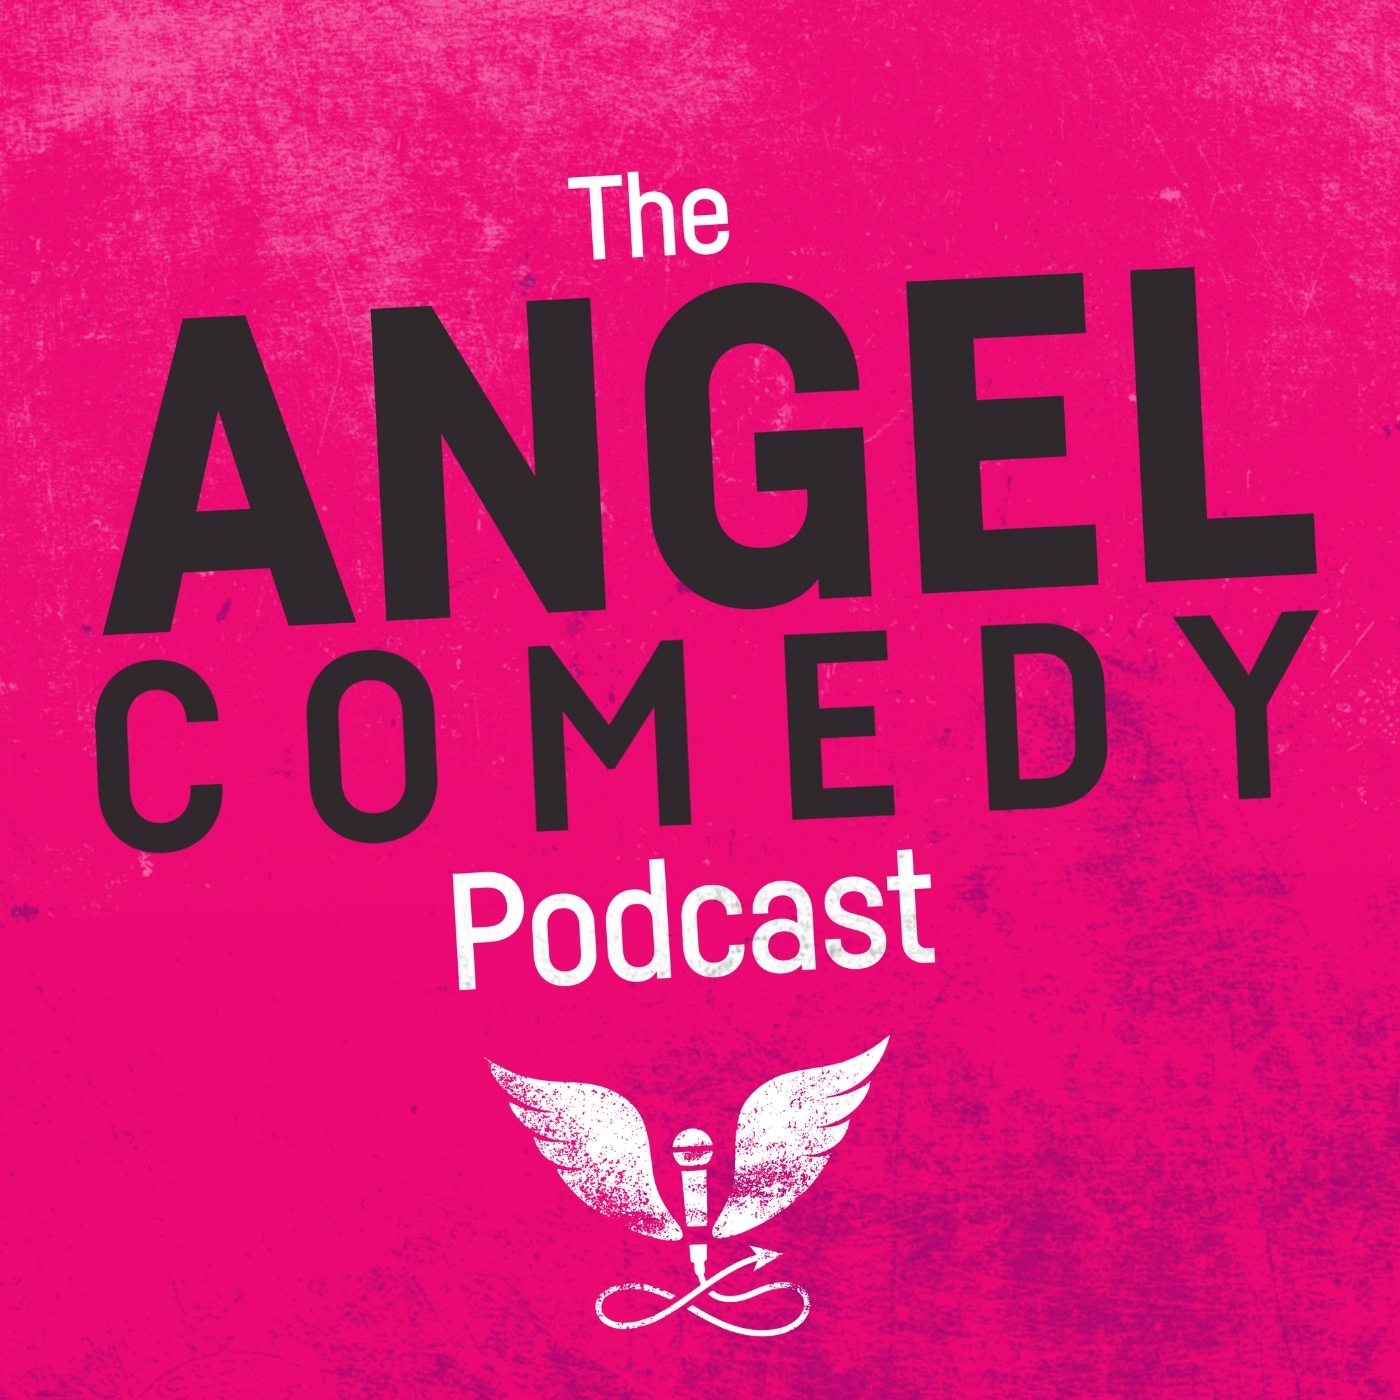 Podcast: The Angel Comedy Podcast with Tamsyn Kelly - Angel Comedy